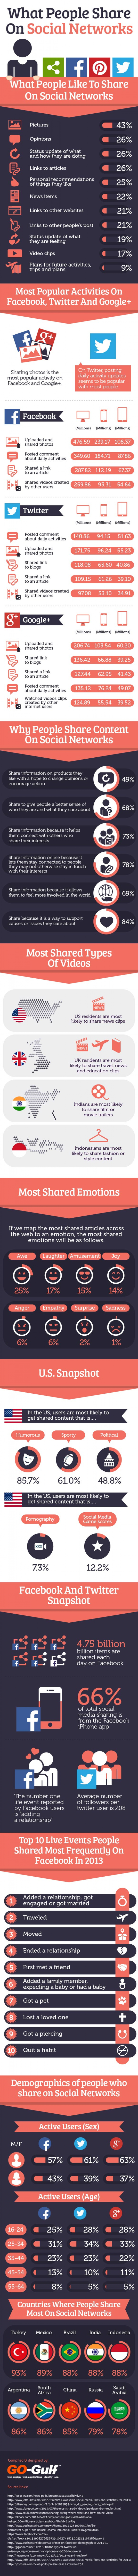 What People Share On Social Networks – Statistics and Trends Infographic